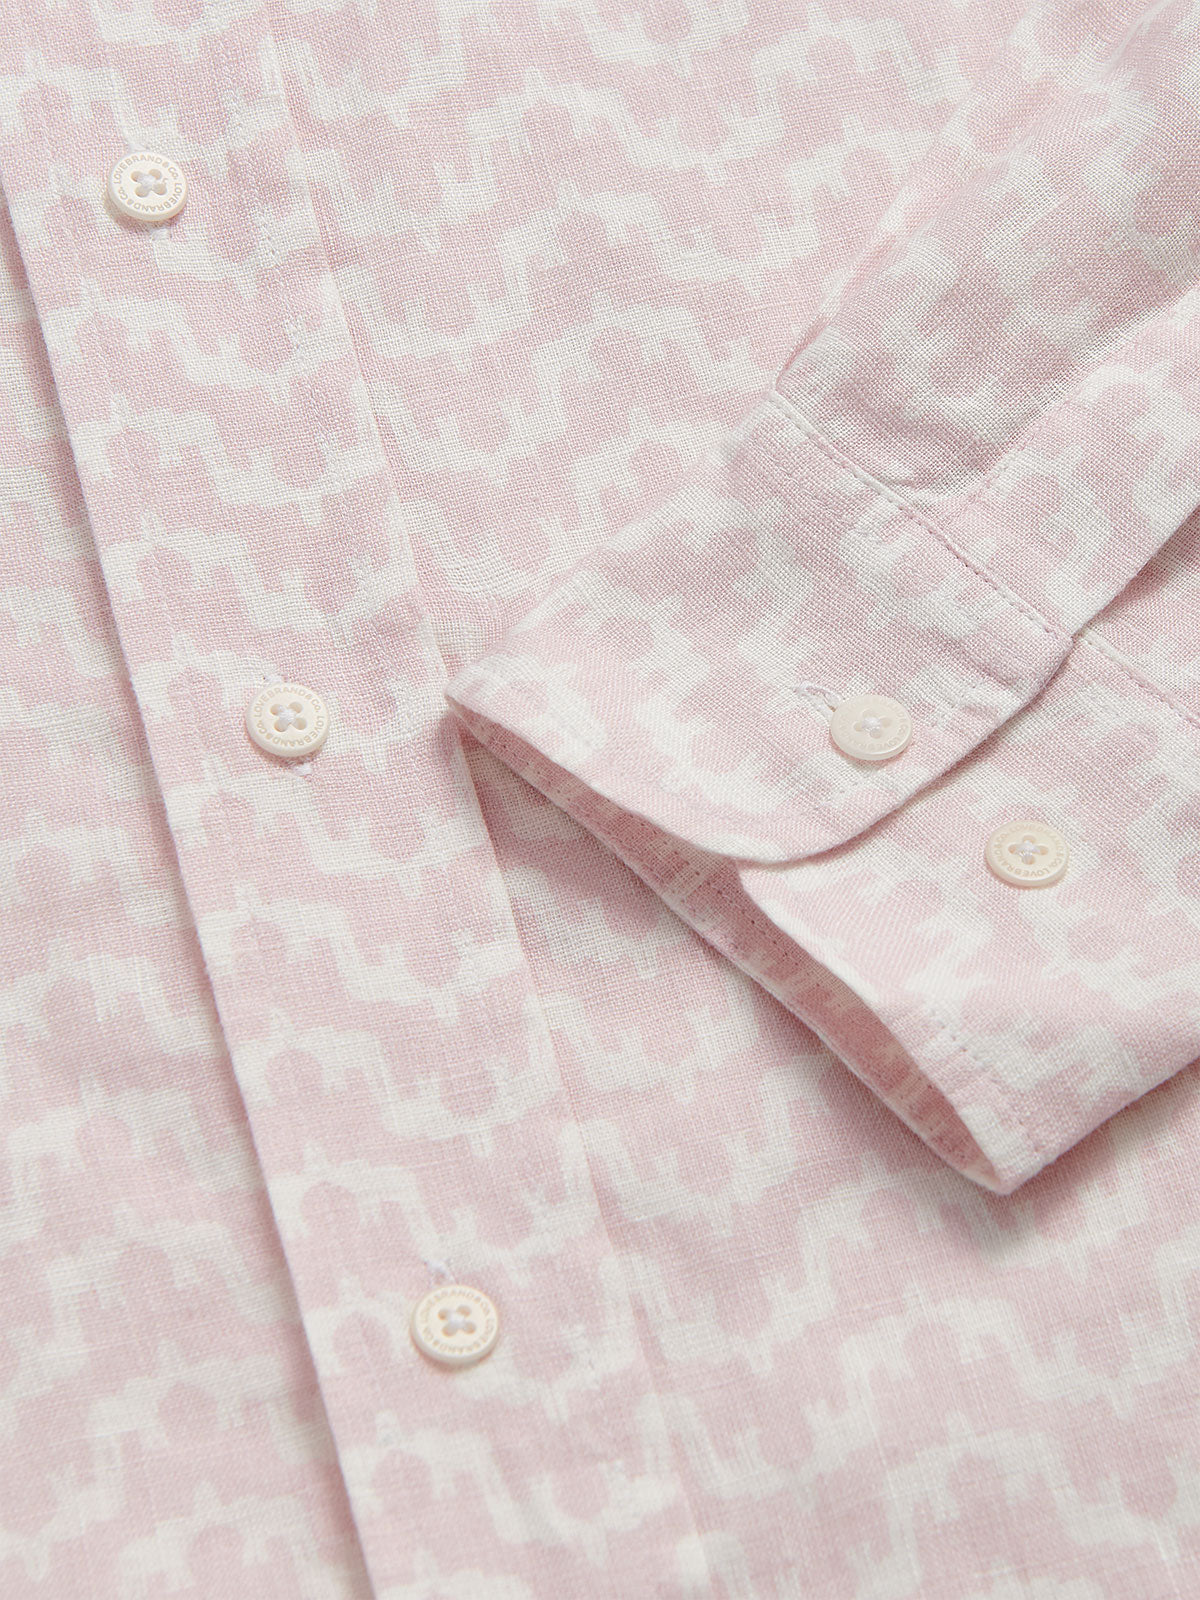 Elephant Palace Pink Abaco mens linen shirt details